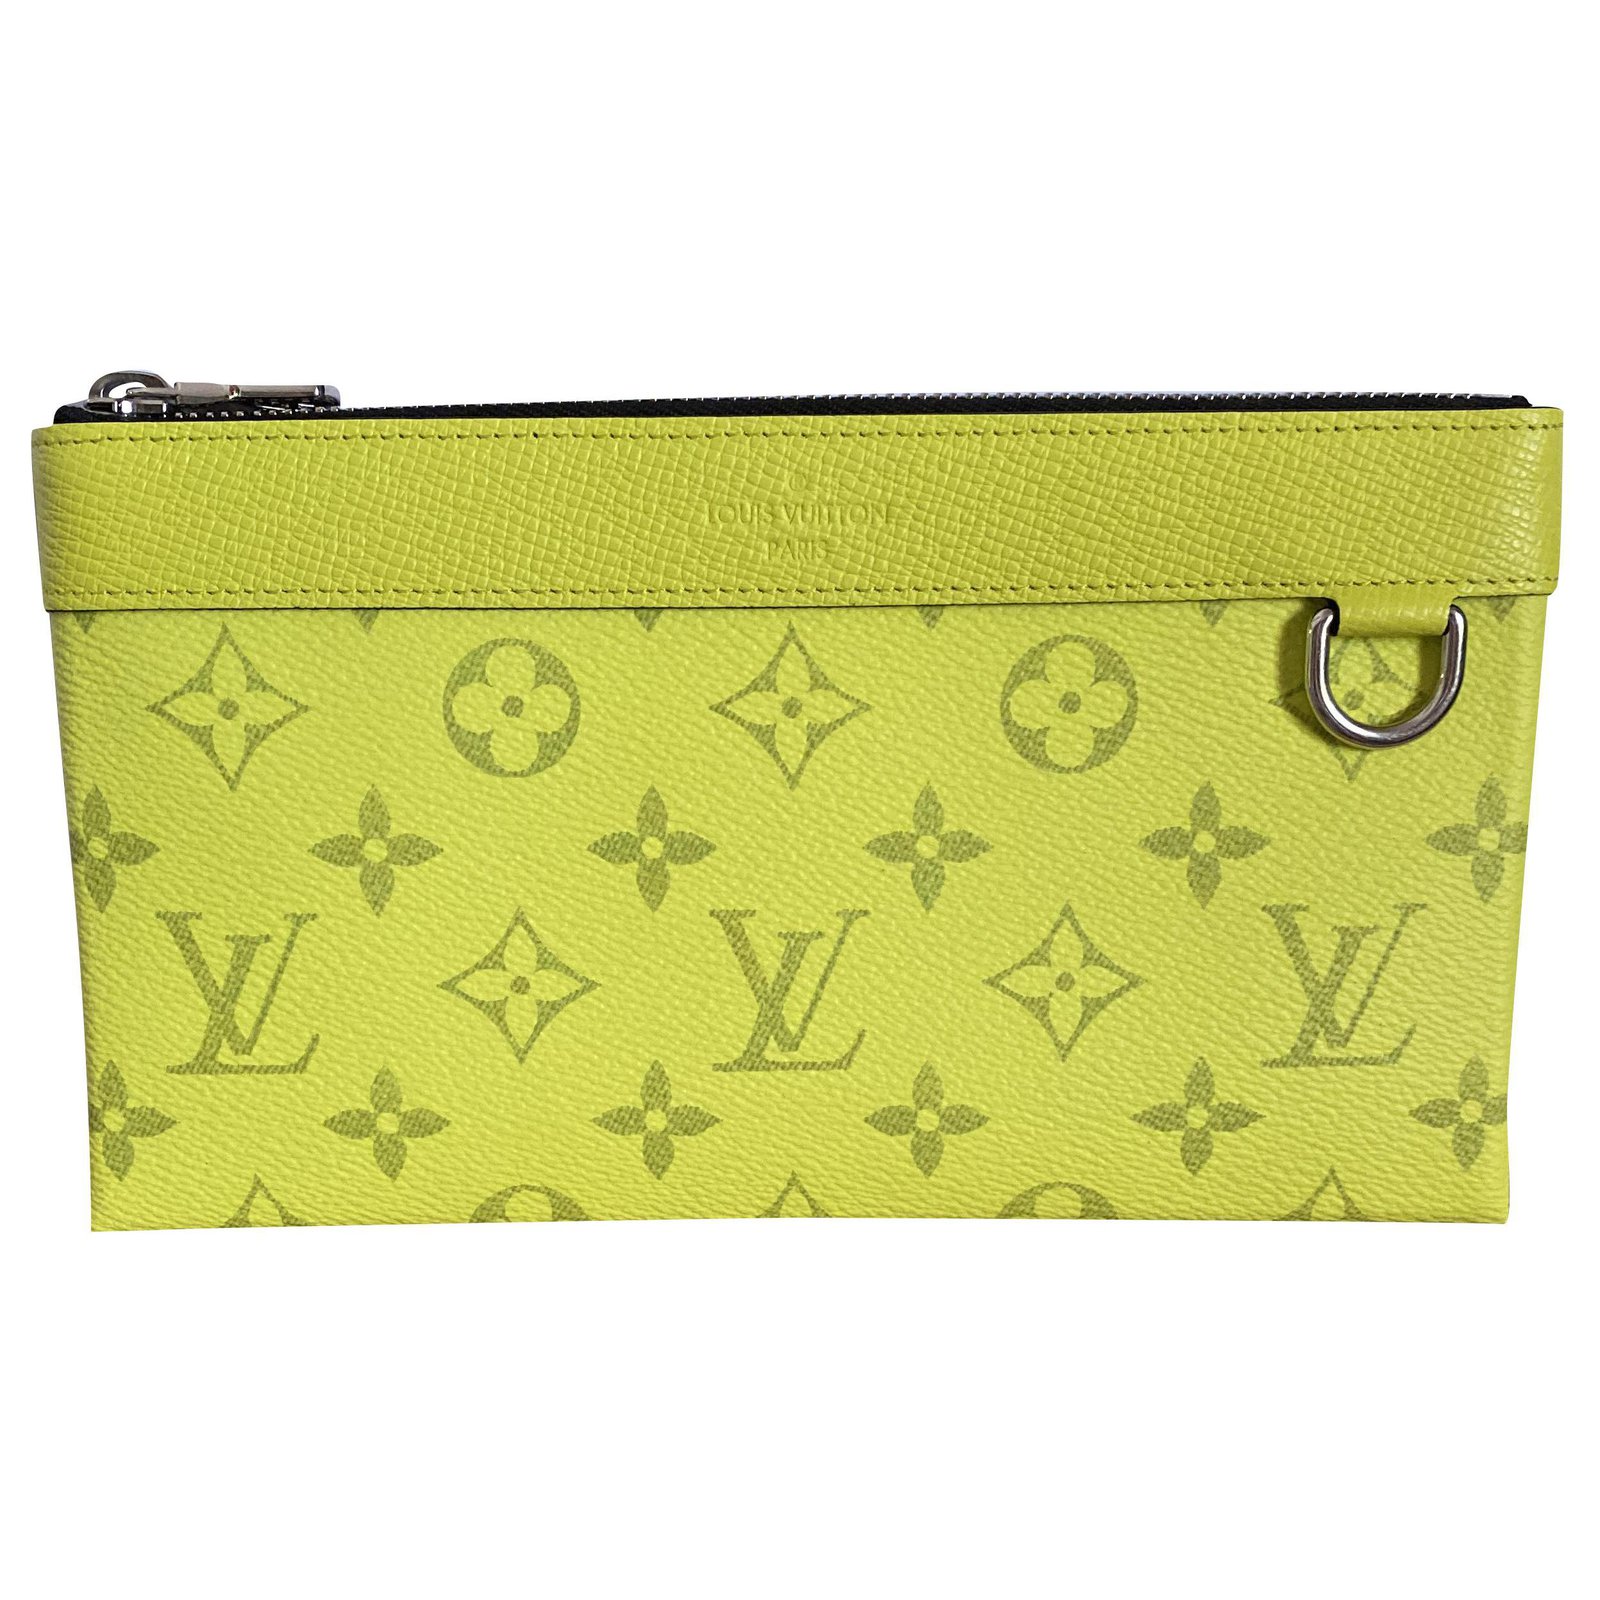 discovery pochette louis vuittons